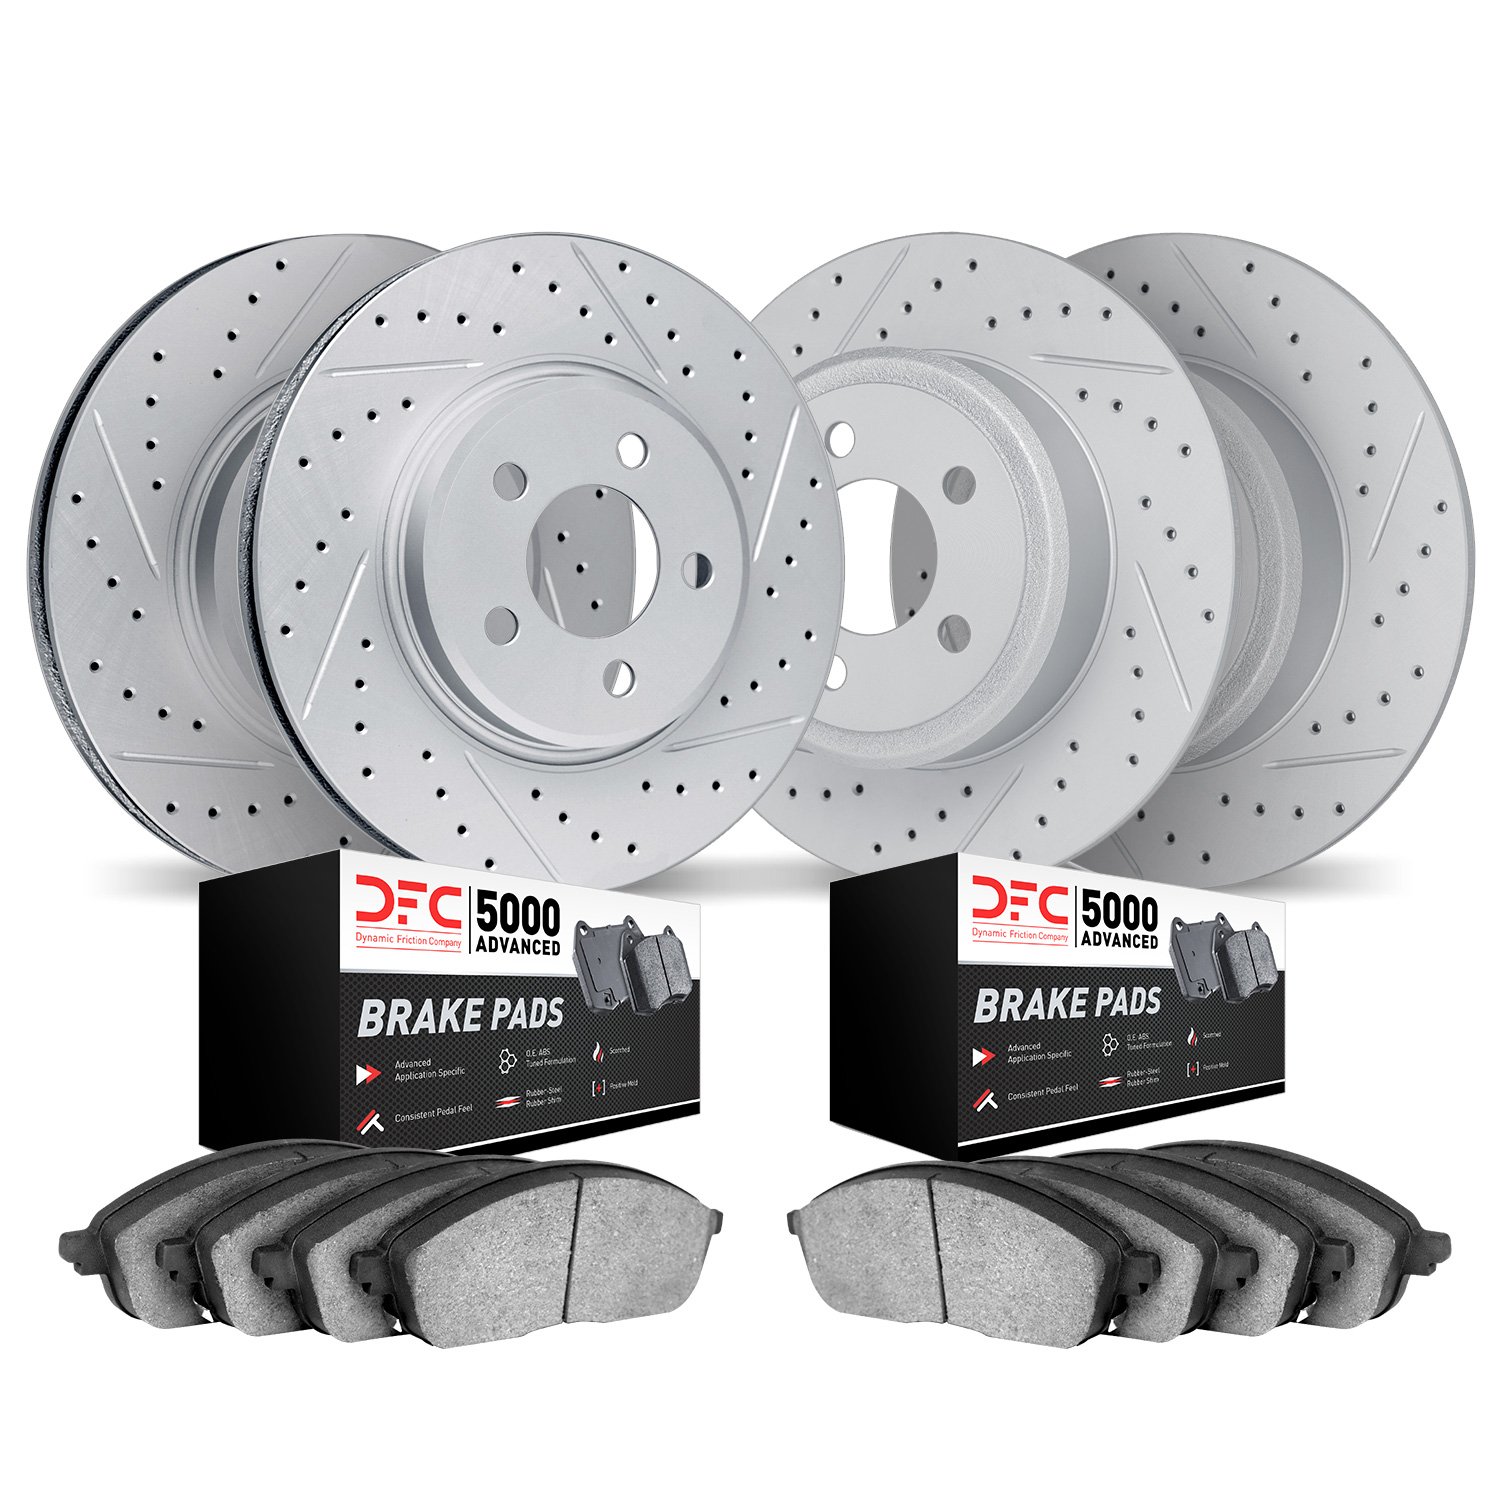 2504-56009 Geoperformance Drilled/Slotted Rotors w/5000 Advanced Brake Pads Kit, 1998-2002 Ford/Lincoln/Mercury/Mazda, Position: